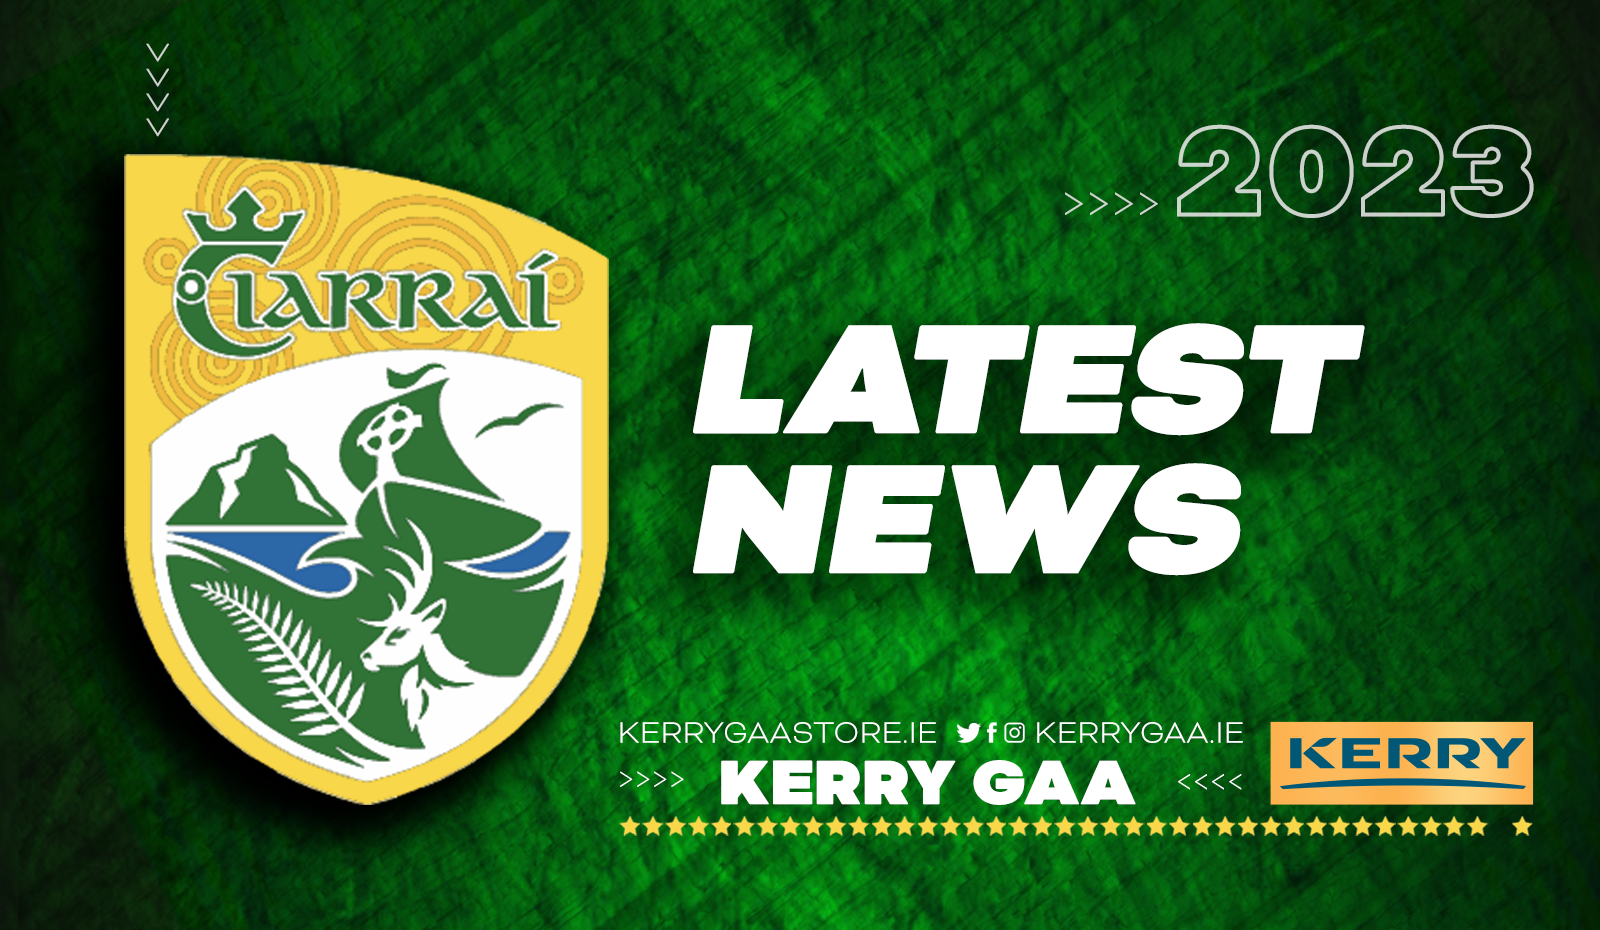 Congratulations to Kerry Camogie & Kerry LGFA!